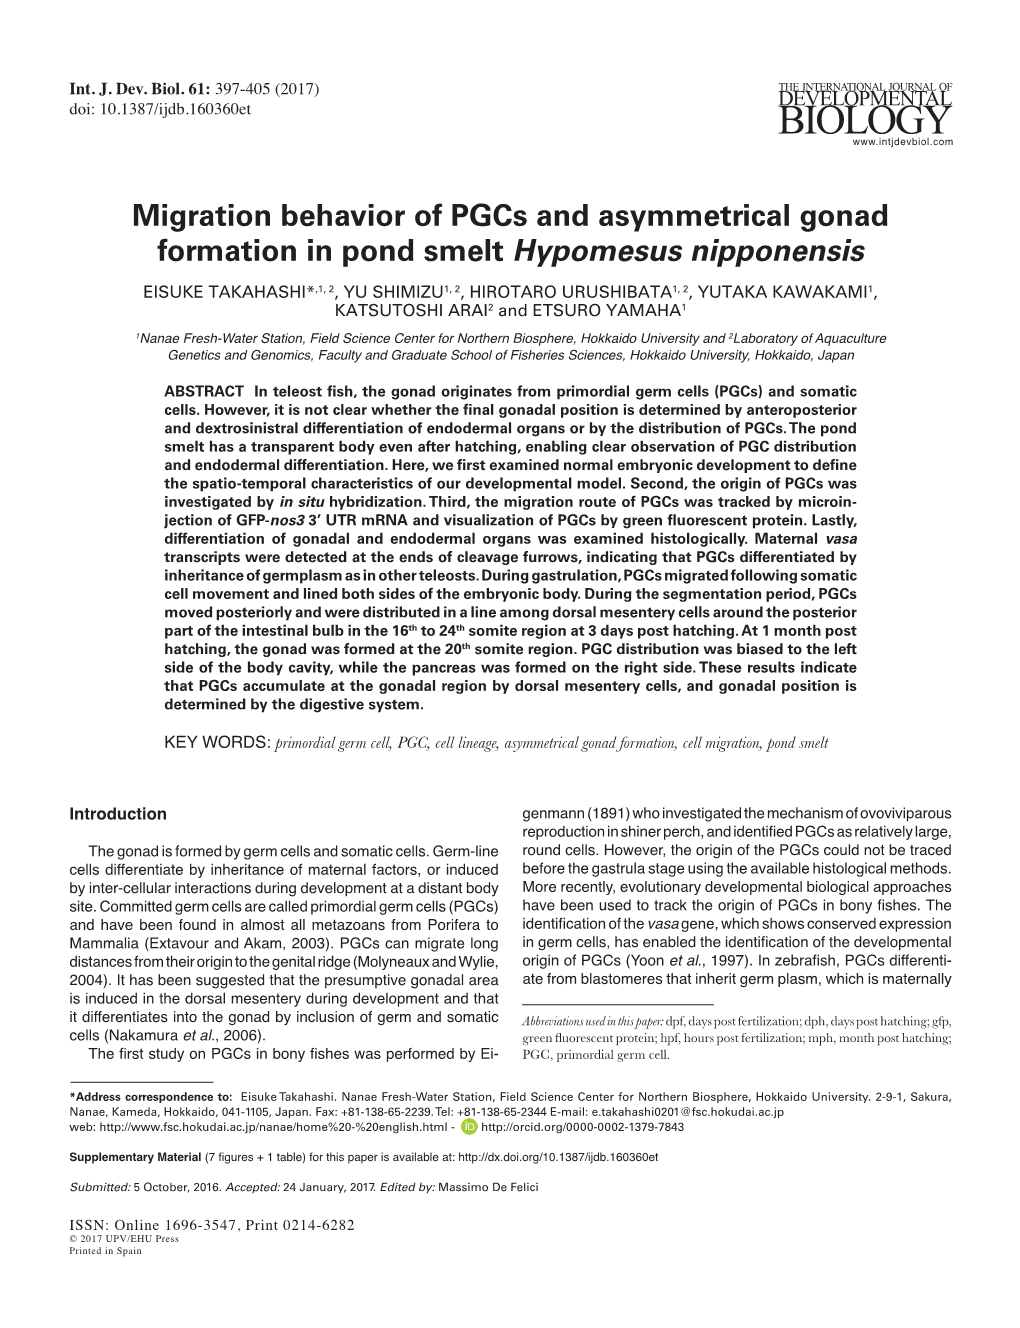 Migration Behavior of Pgcs and Asymmetrical Gonad Formation In